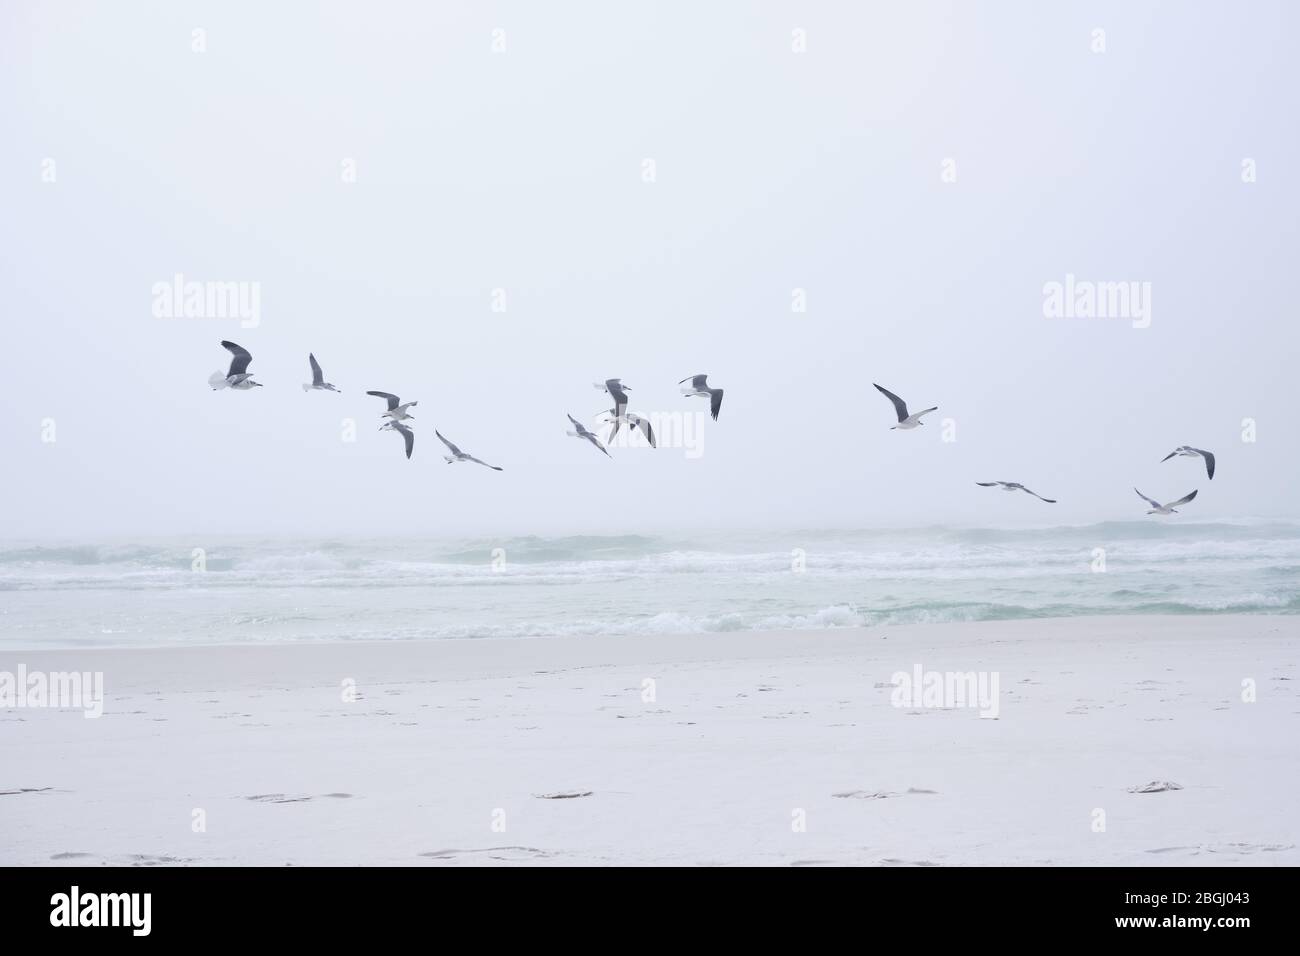 Seagulls fly above dazzling white sand beach near Destin, Florida. Small, breaking waves reveal emerald green tones in the sea water. Stock Photo